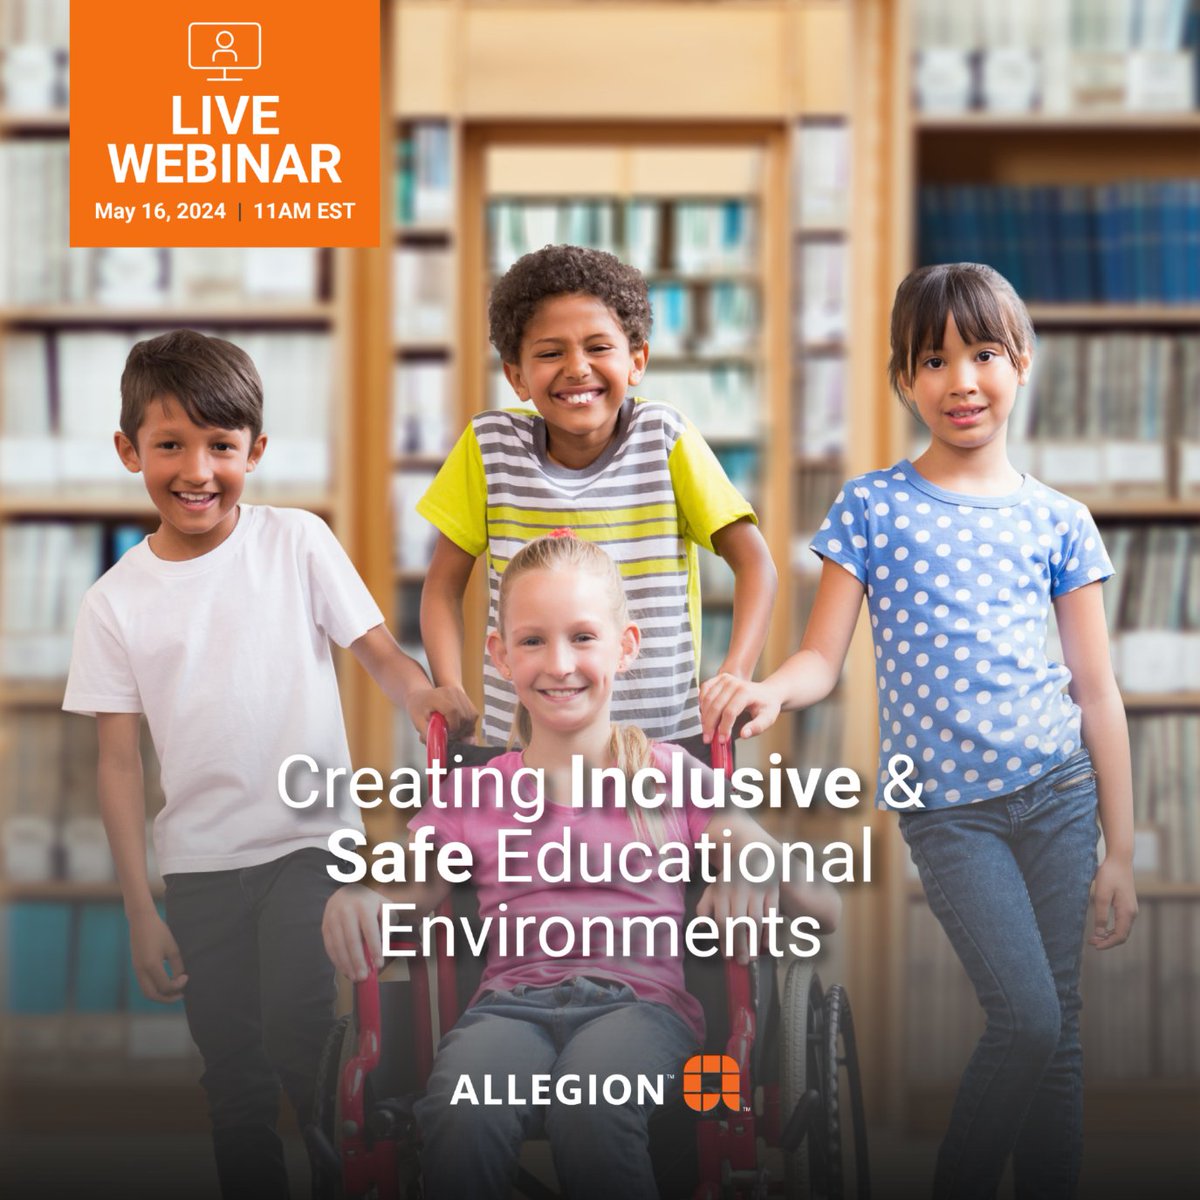 Promoting Inclusive and Safe Learning Environments: Join @AllegionUS and @SafeSchoolsOrg for a live webinar on providing safety and security for students of all abilities.

May 16th at 11:00 am EST ms.spr.ly/6011Yyymc

#SchoolSafety #SchoolSecurity #NASRO #SRO #K12Safety